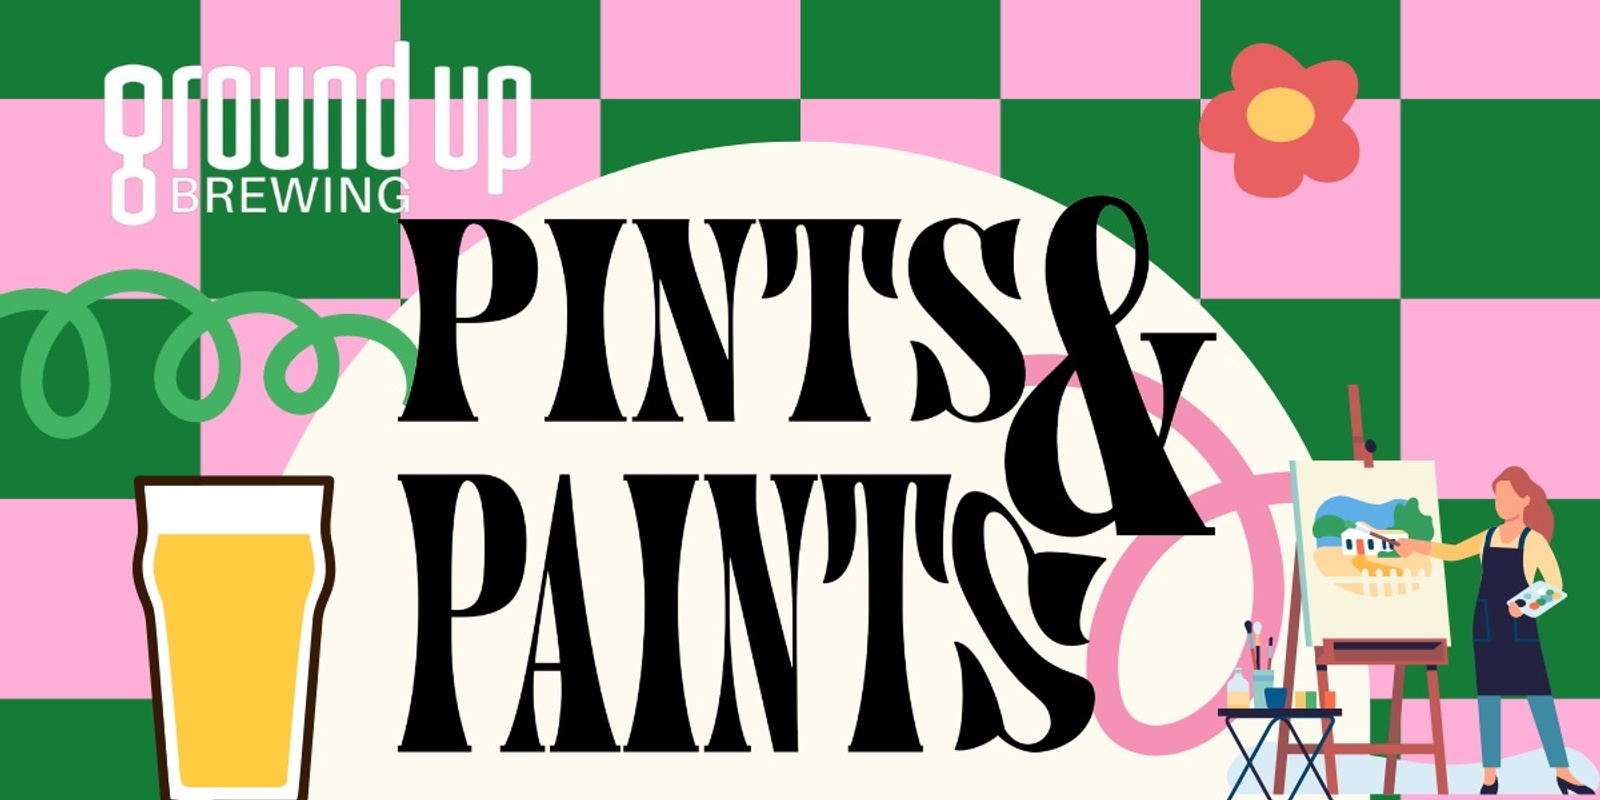 Banner image for Pints & Paints @ GroundUp Brewing